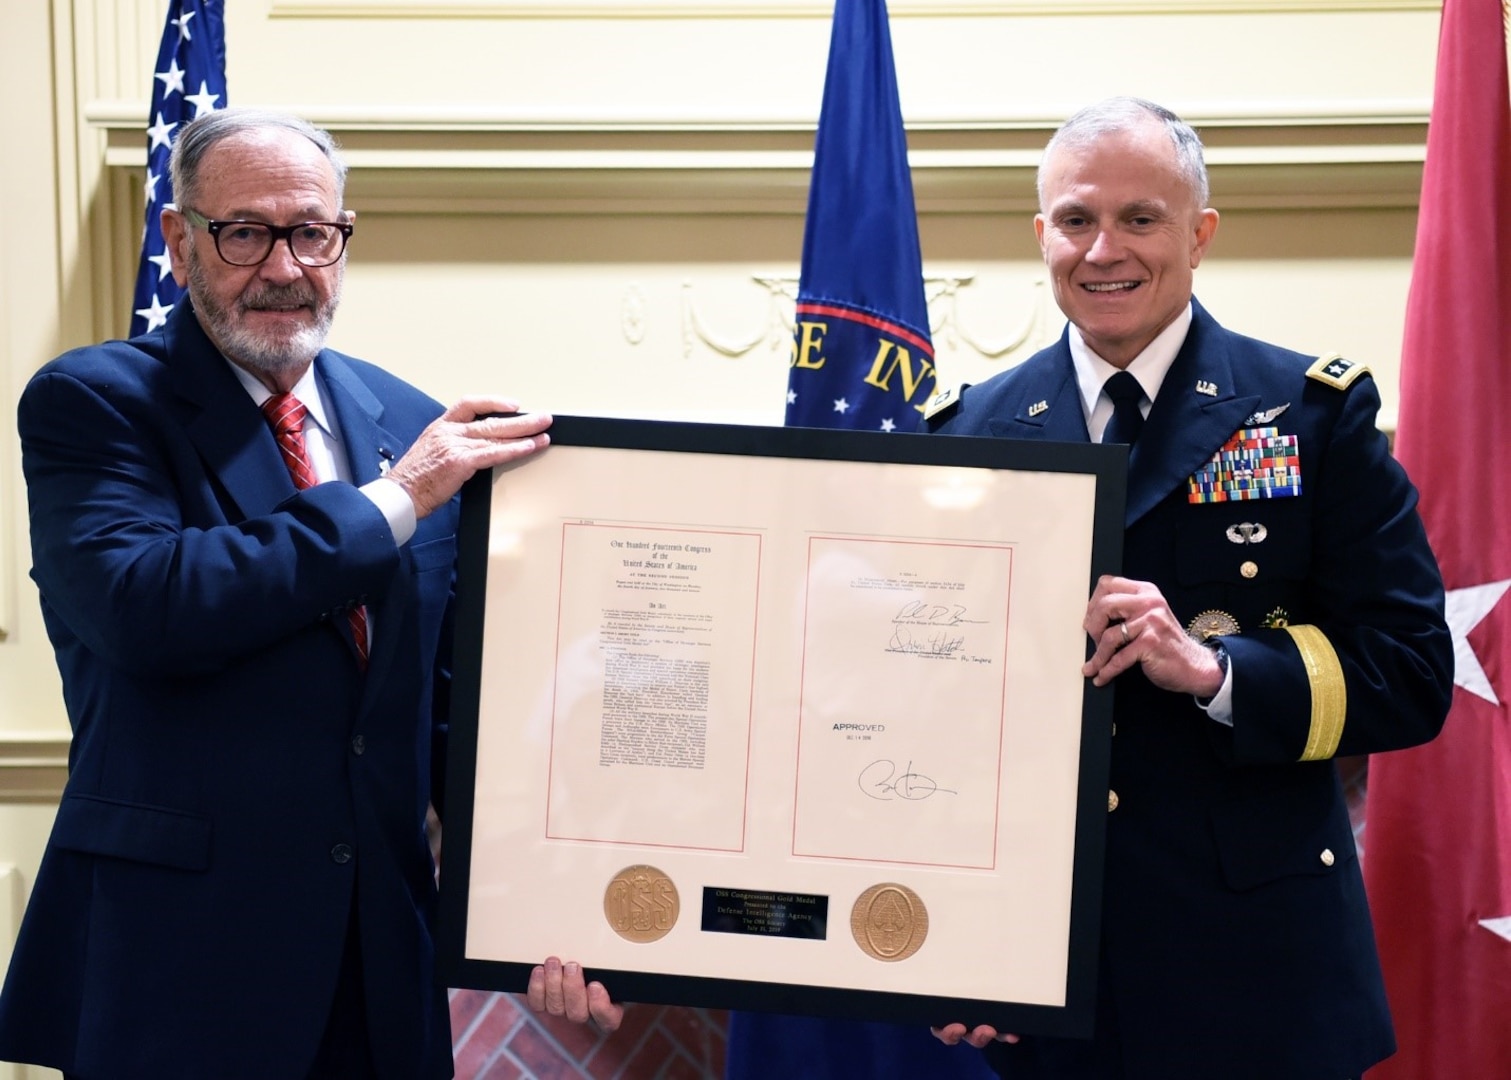 JOINT BASE ANACOSTIA-BOLLING, D.C. (July 31, 2019) Retired Lt. Gen. Patrick Hughes, serving as the Office of Strategic Service Society Representative, presenting the OSS Congressional Gold Medal to DIA Director Lt. Gen. Robert P. Ashley Jr. (DIA photo by David Richards/Released)